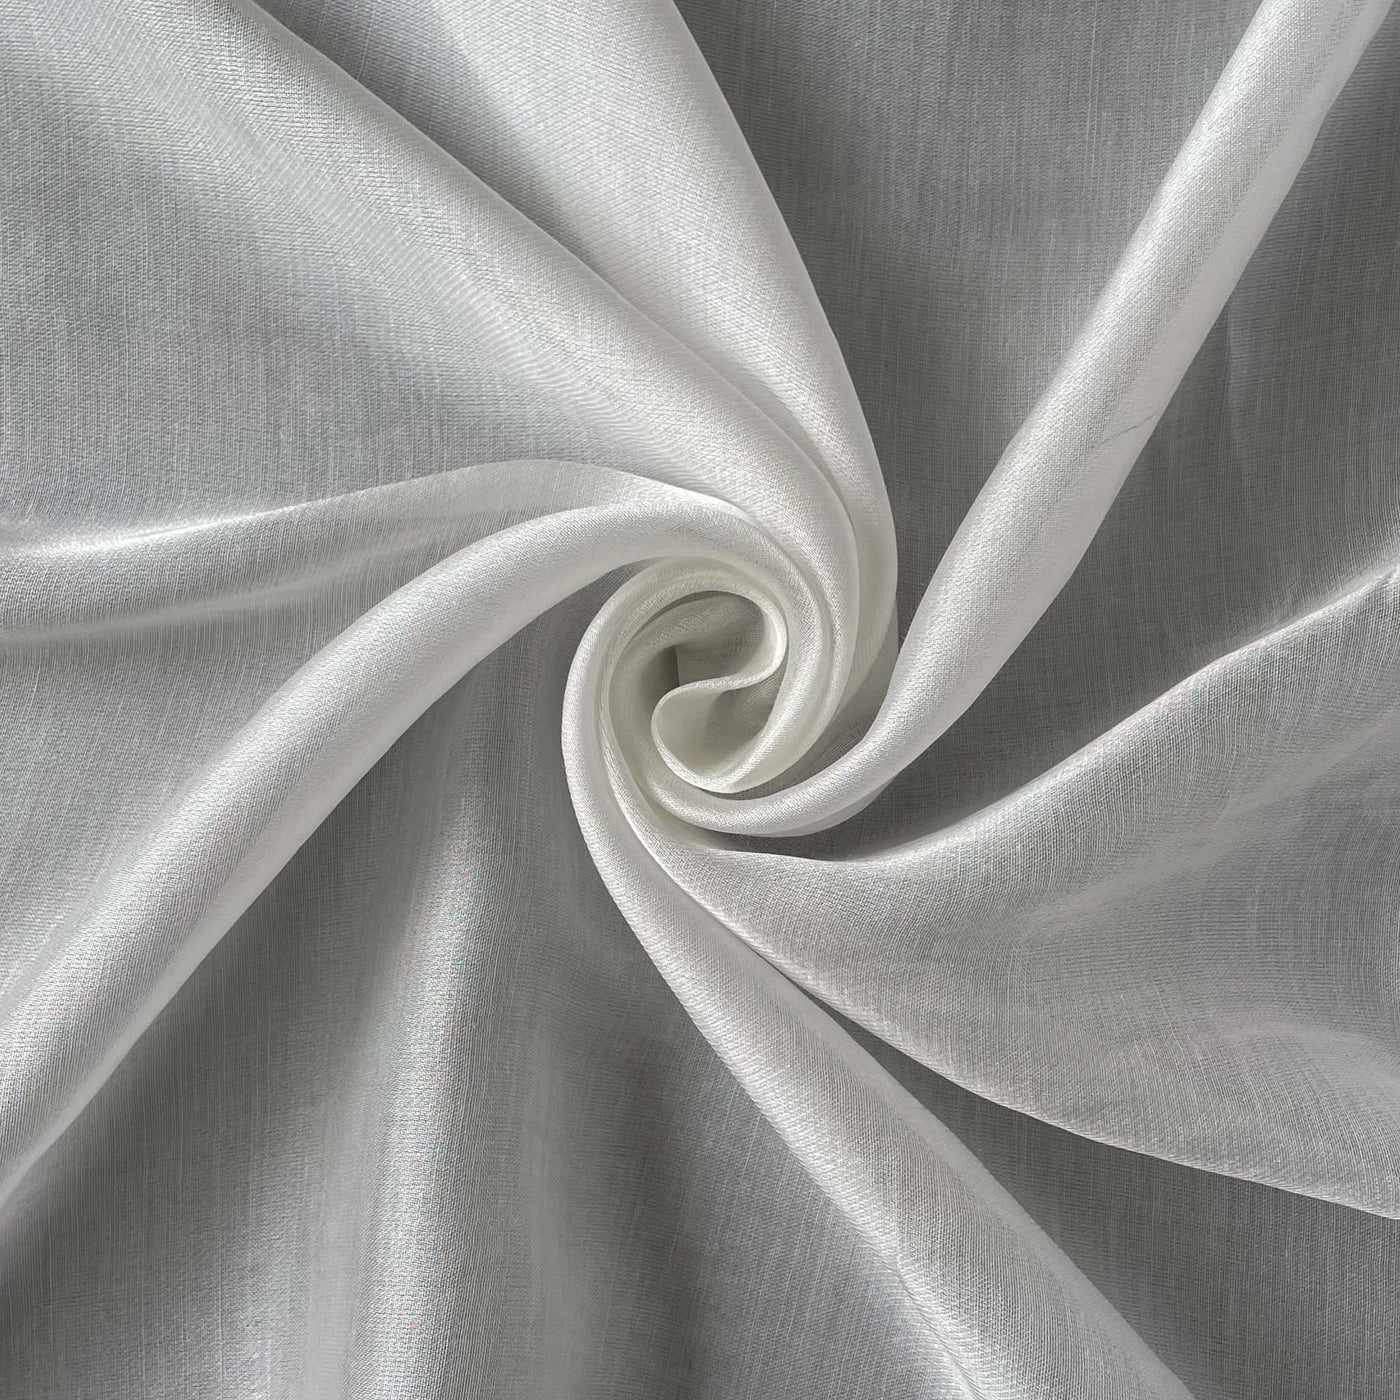 Fabric Pandit Fabric White Dyeable Pure Viscose Organza Satin Plain Fabric (Width 44 Inches, 92 Gms)